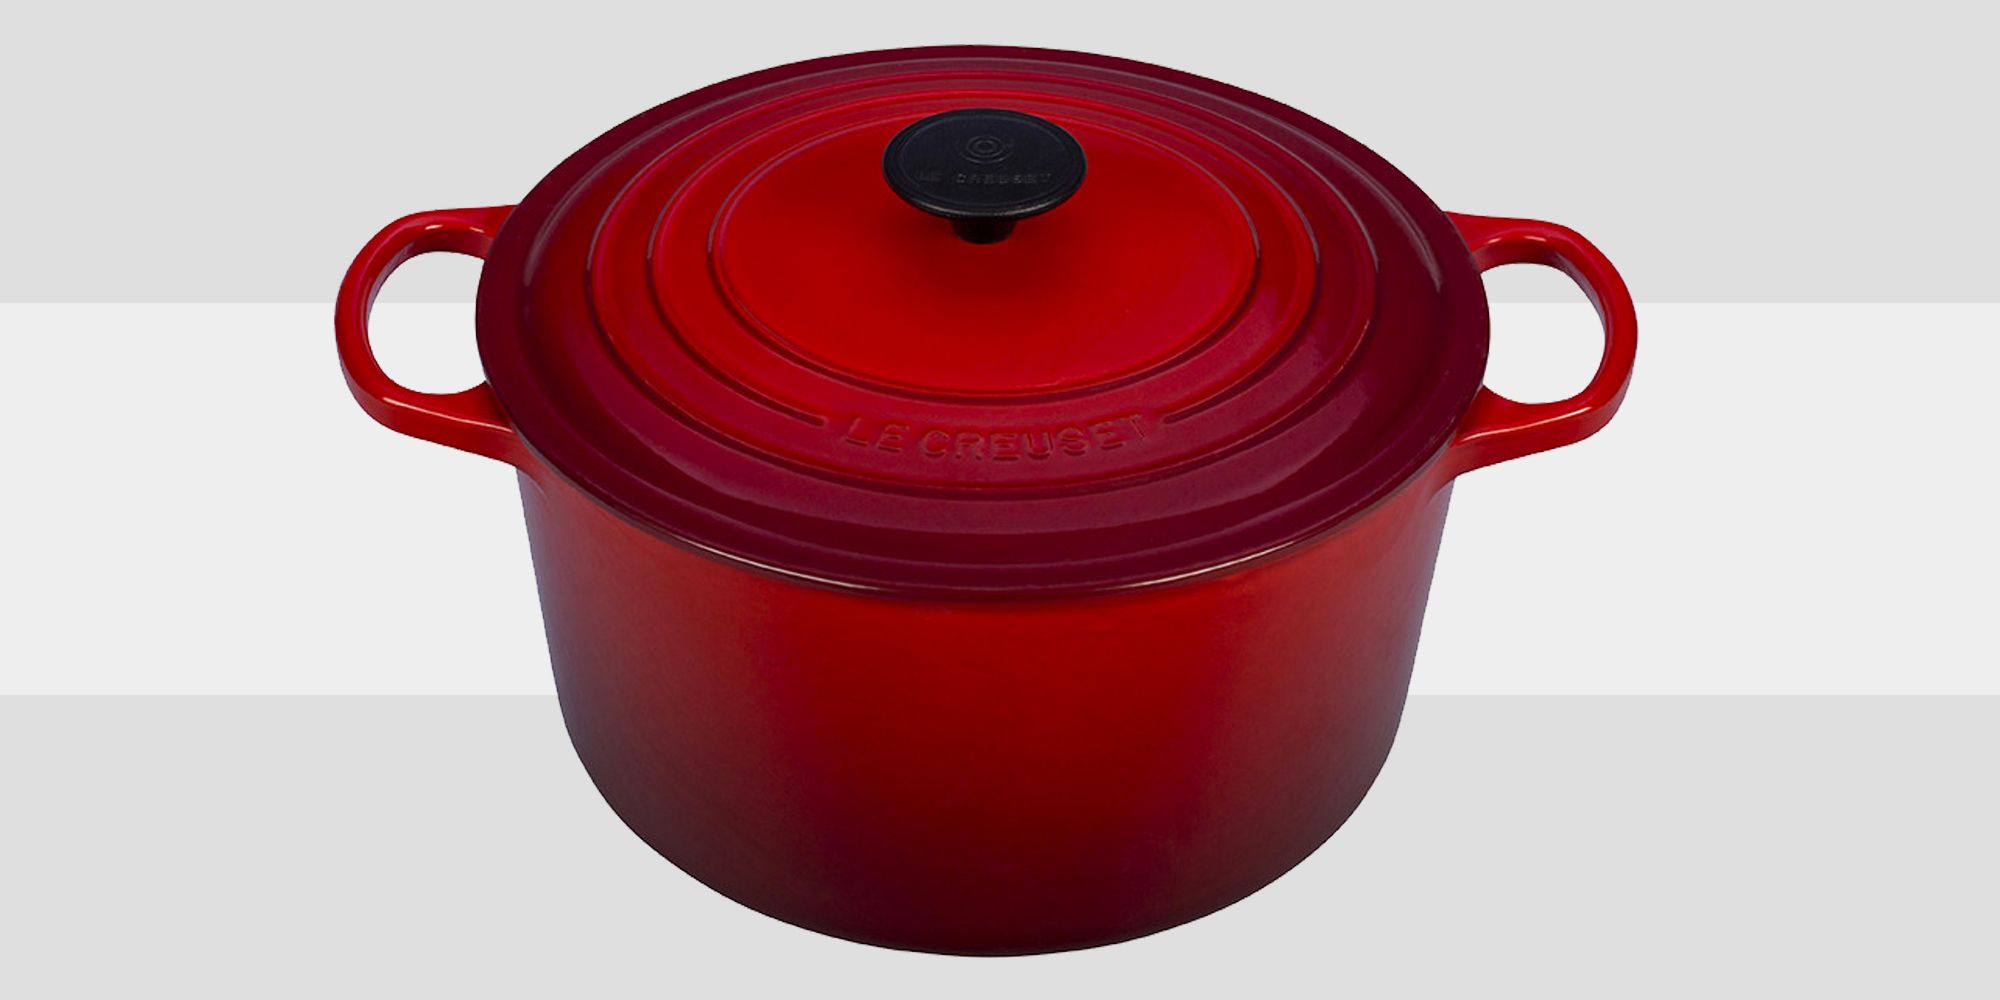 Flipboard Stock Up on Cheap Le Creuset Cookware from Williams Sonoma's